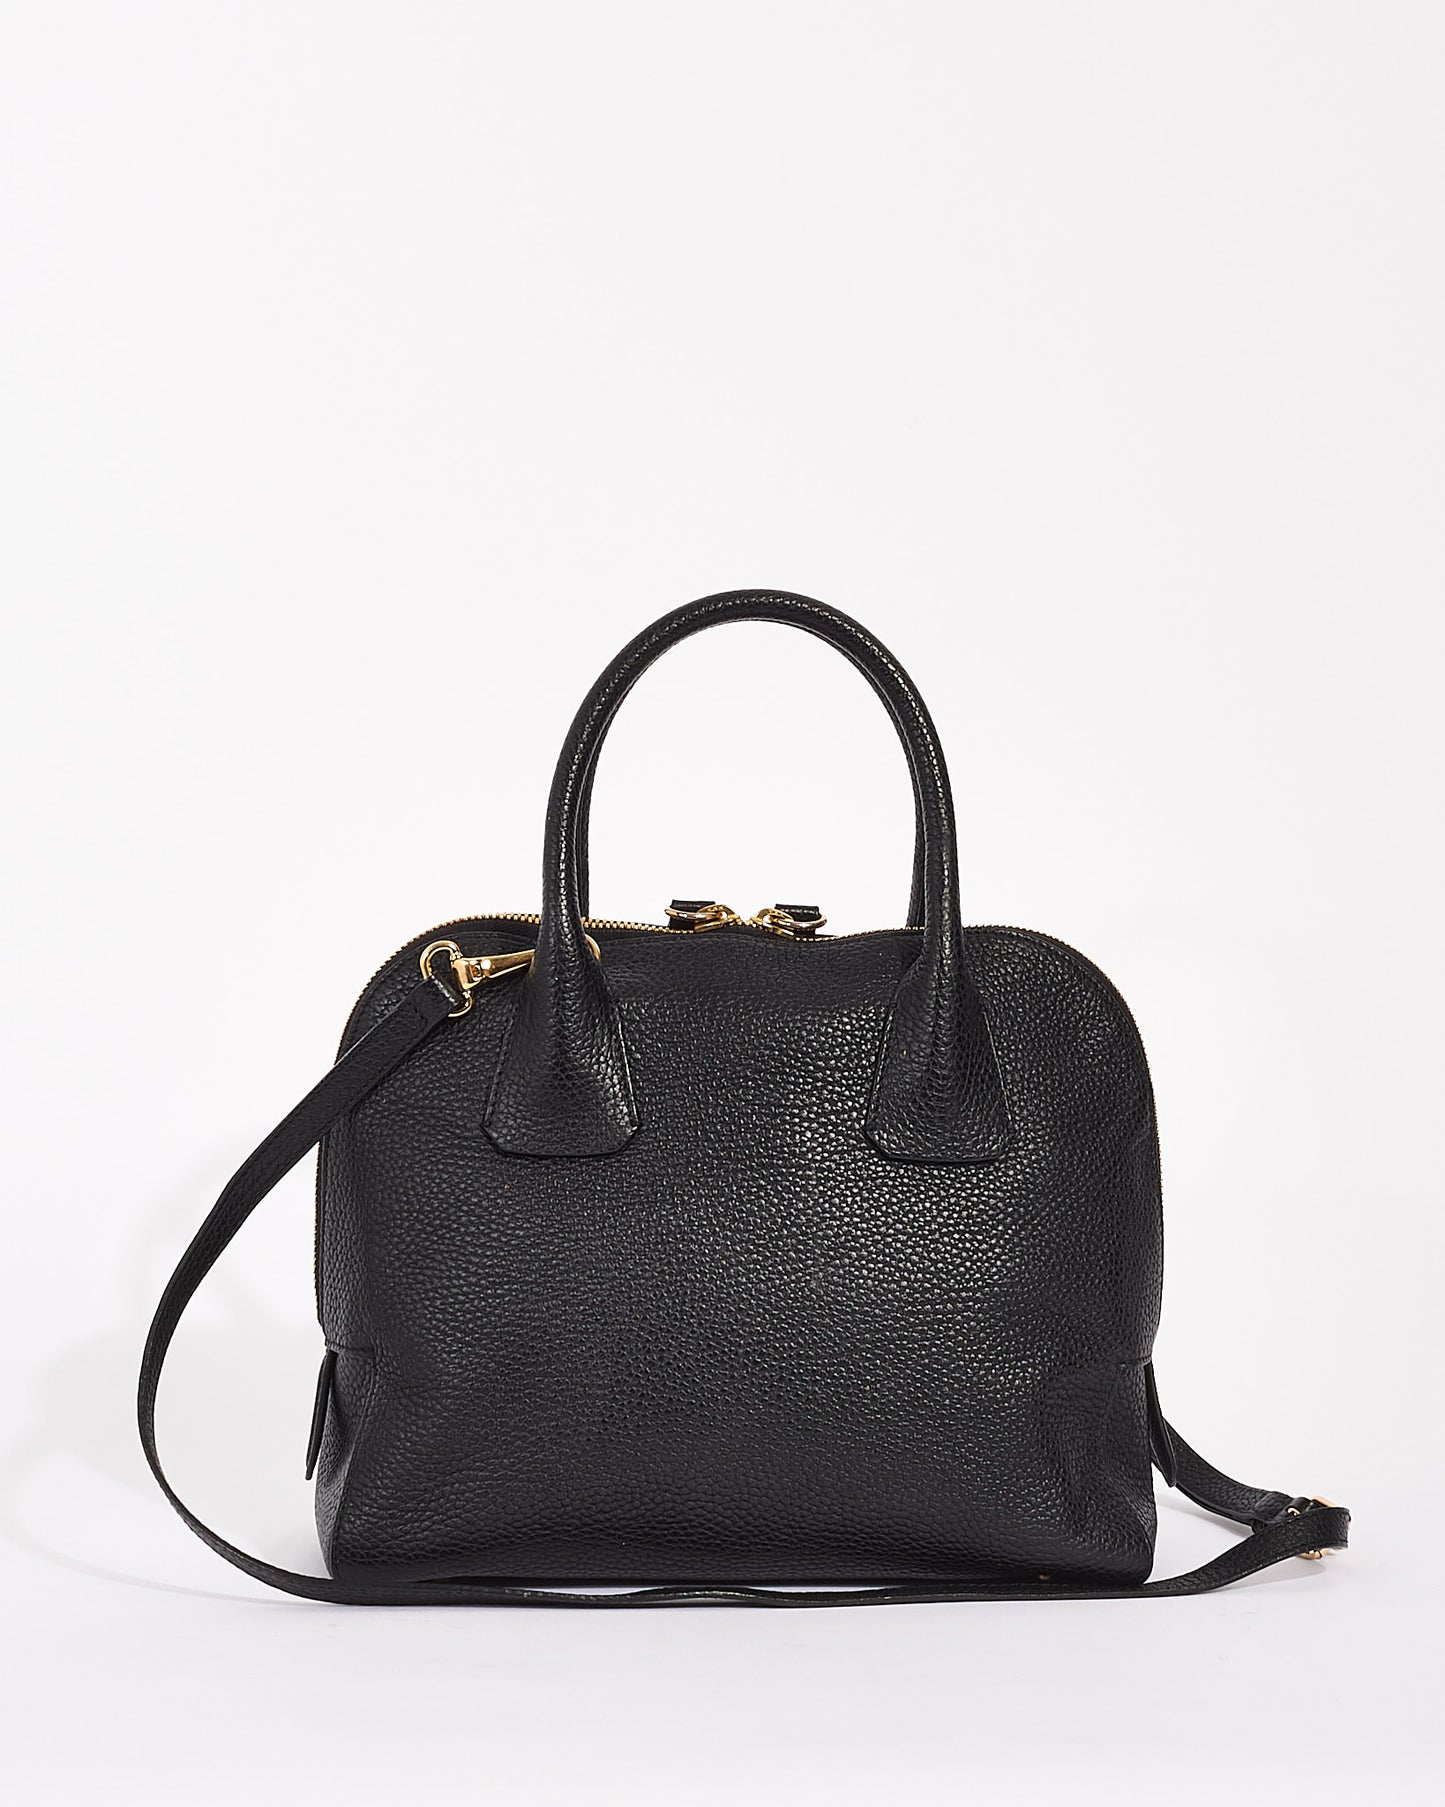 Burberry Black Pebbled Leather Greenwood Satchel with Strap